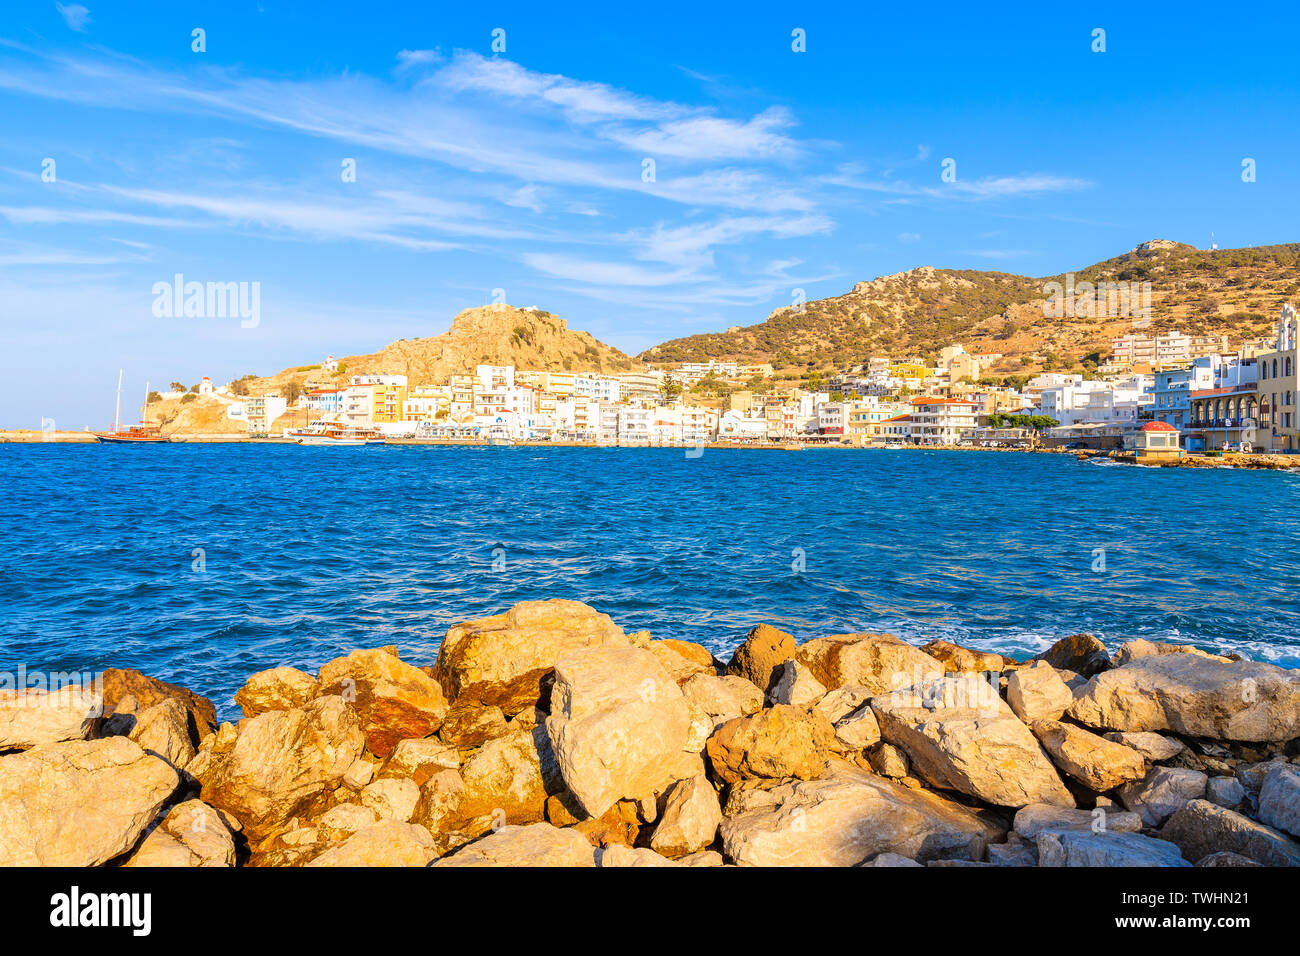 View of picturesque Pigadia port on Karpathos island at sunset time, Greece Stock Photo